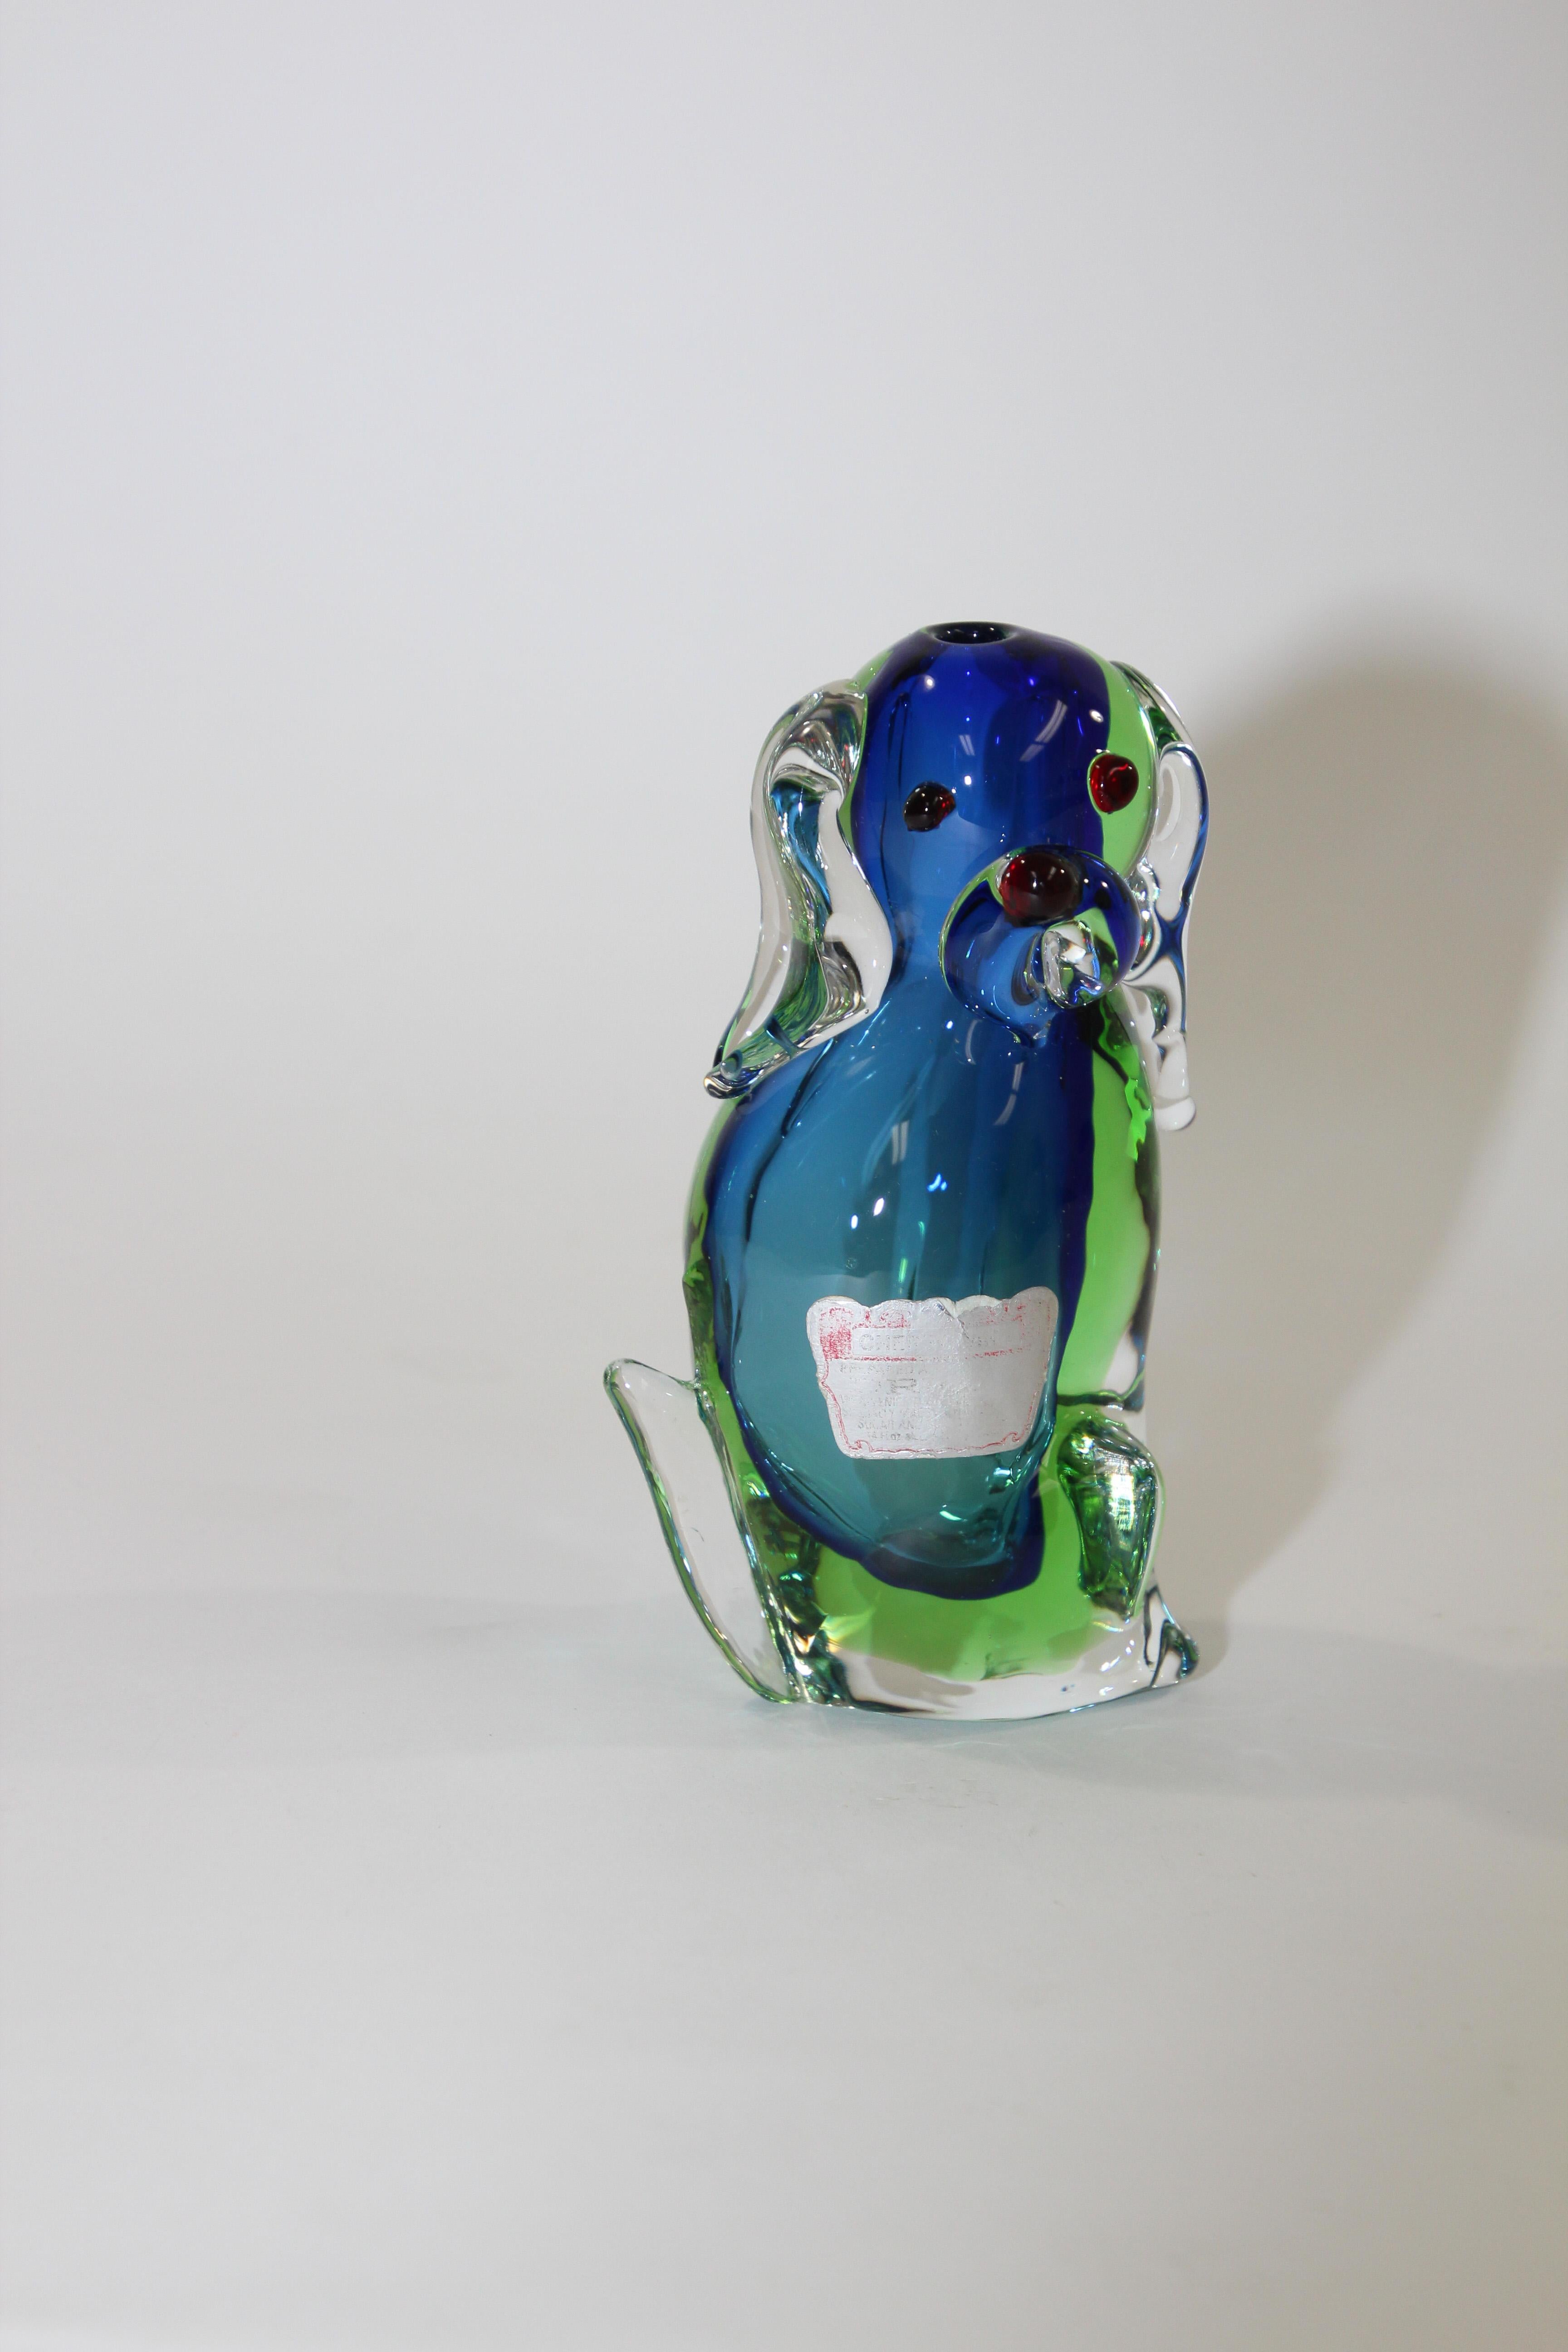 Vintage Murano Emerald Green and Blue Dog Sculpture Paperweight 2